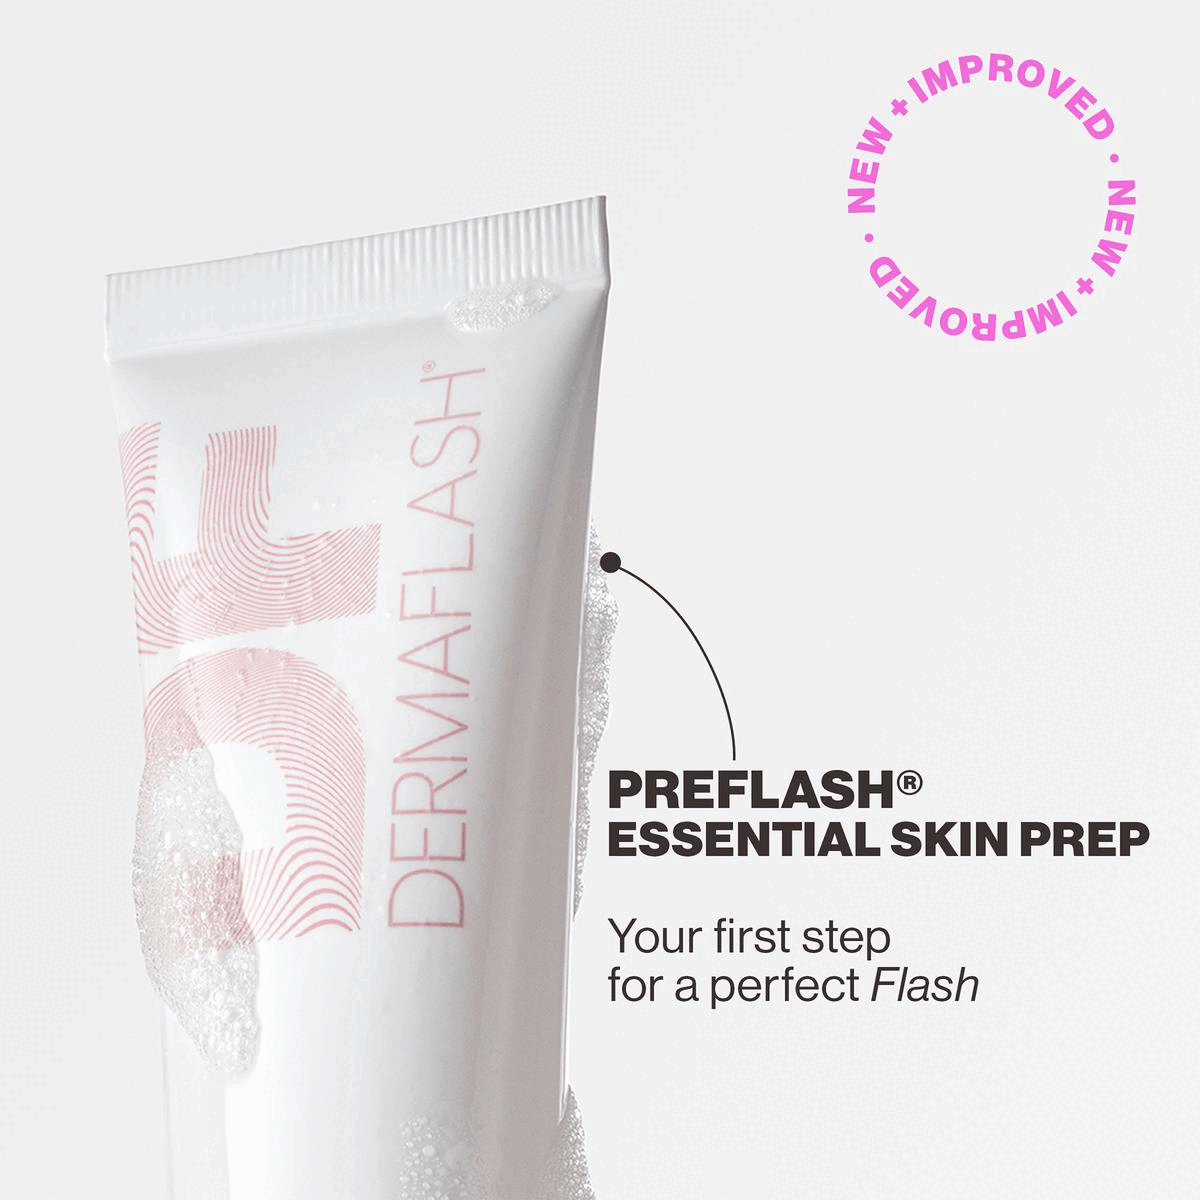 Image 1, New and Improved PREFLASH® ESSENTIAL SKIN PREP Your first step for a perfect Flash Image 2, New and Improved MICROFINE EDGE, Ultimate precision, Closer contact with skin, Upgraded safety cage